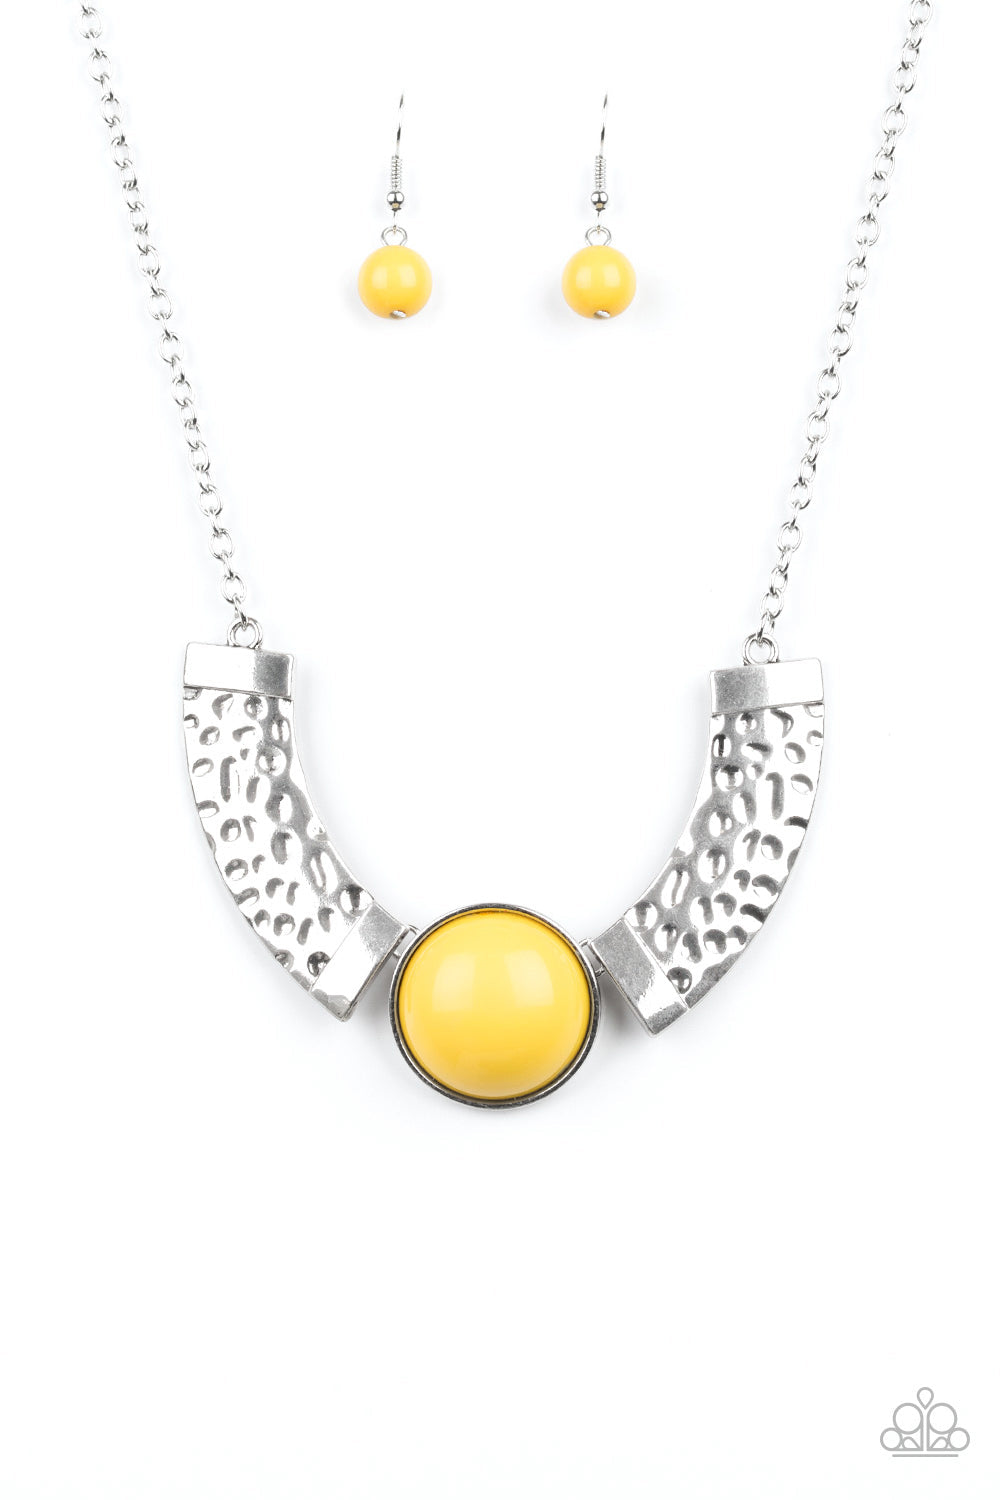 Egyptian Spell - Yellow and Silver Necklace - Paparazzi Accessories - Dramatic silver plates connect with a shiny yellow beaded center, creating an indigenous collar-like pendant. The shiny silver plates are delicately hammered, adding a flashy metallic texture to the tribal inspired palette. Features an adjustable clasp closure.